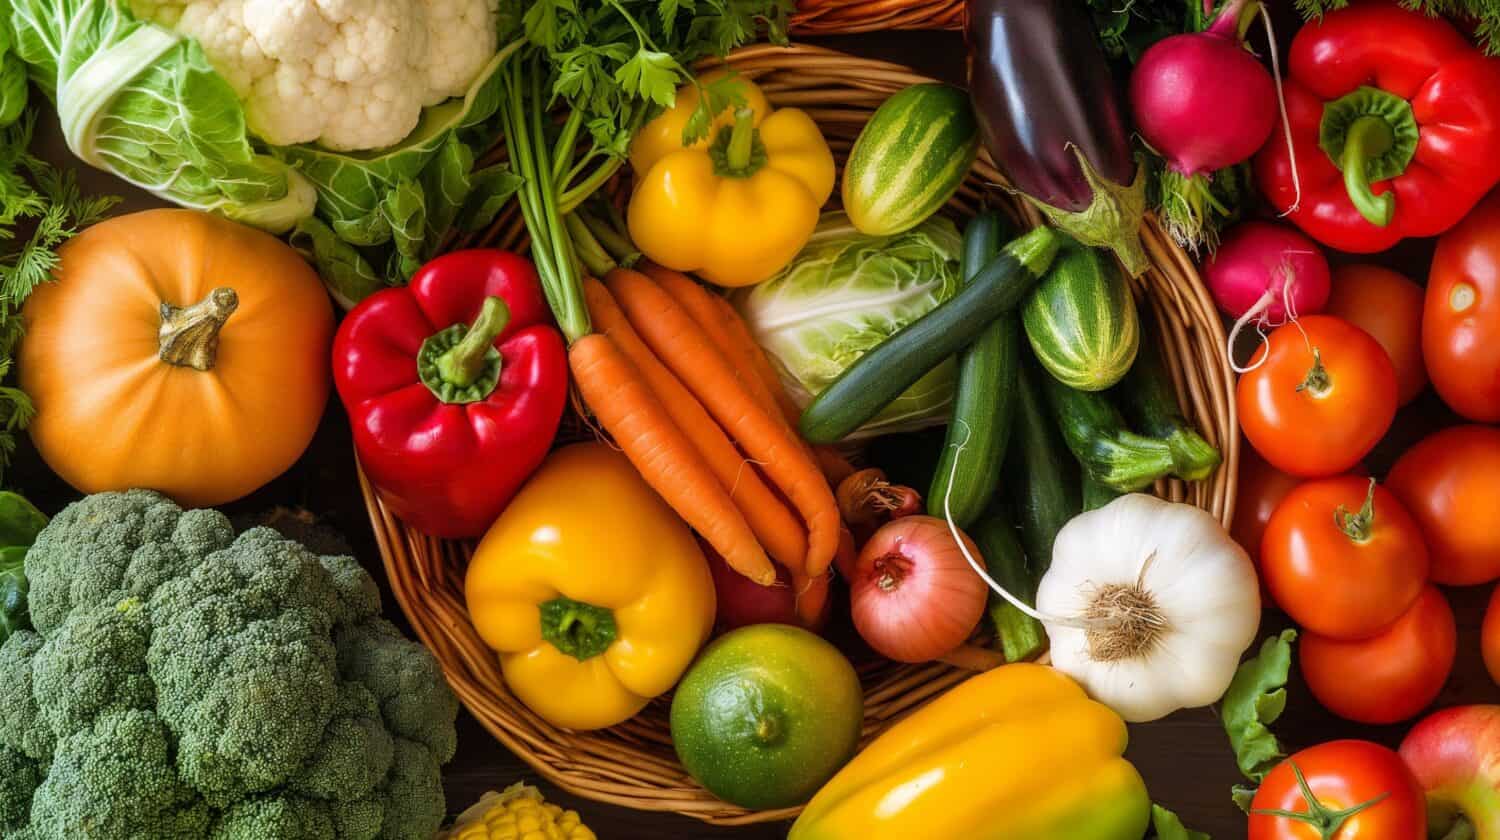 Assortment of Fresh Organic Vegetables, Fresh carrots, tomatoes, and peppers; a bounty of organic produce